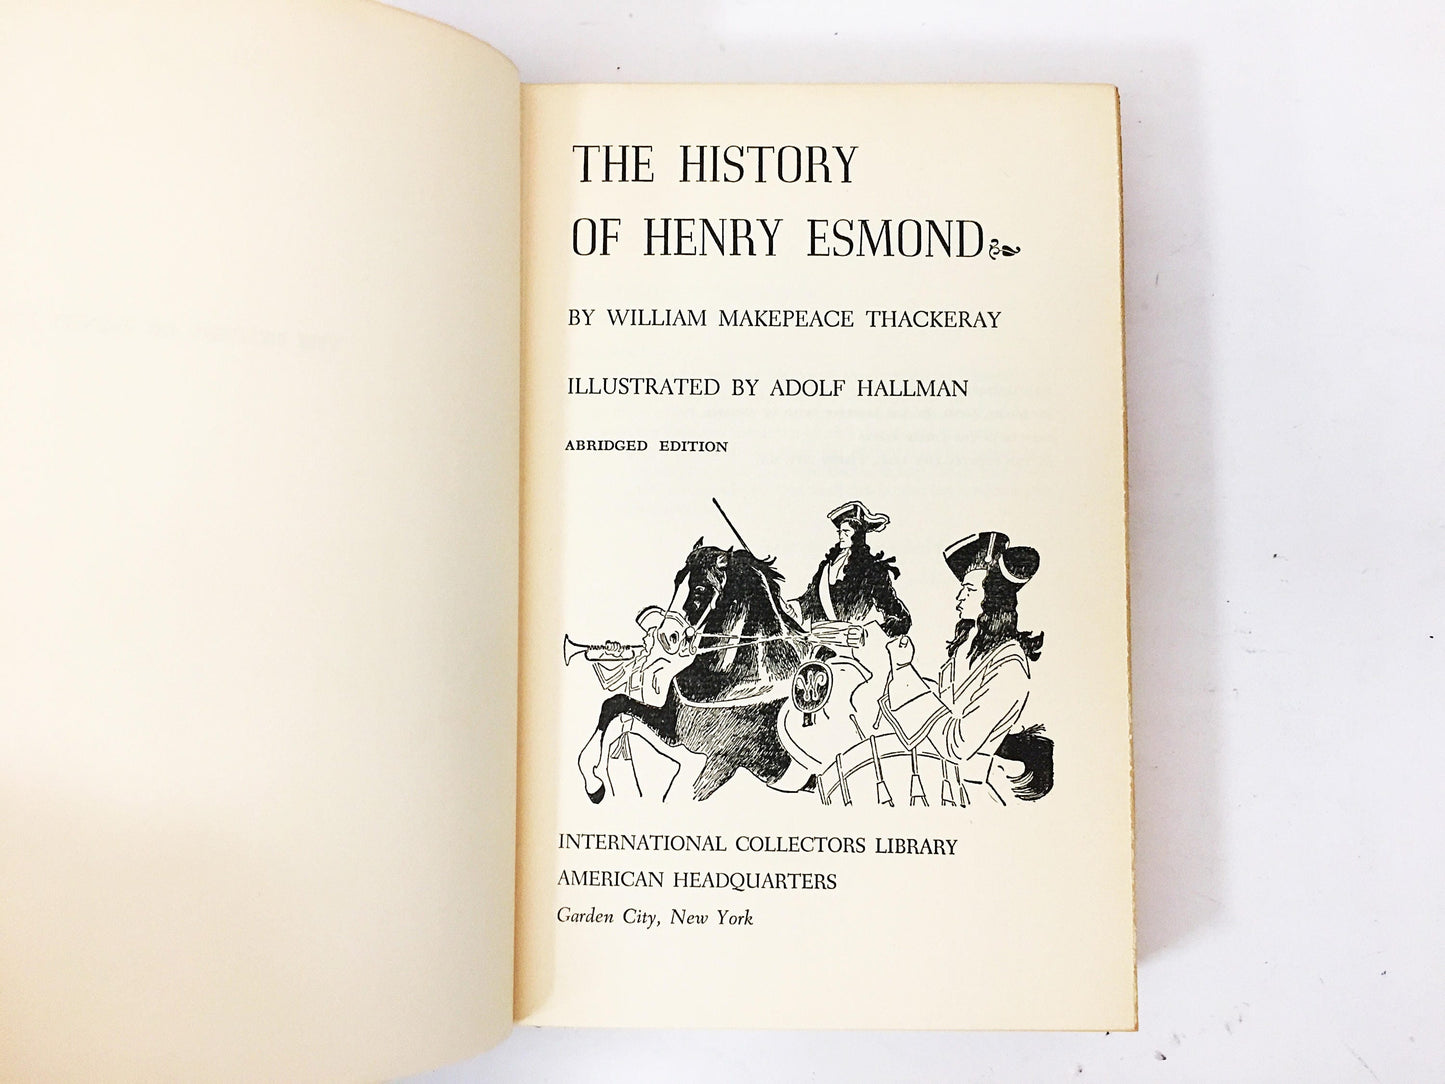 Thackeray Masterpiece History of Henry Esmond. Beautiful vintage book about a young man making his way in the corrupt world. Home decor gift